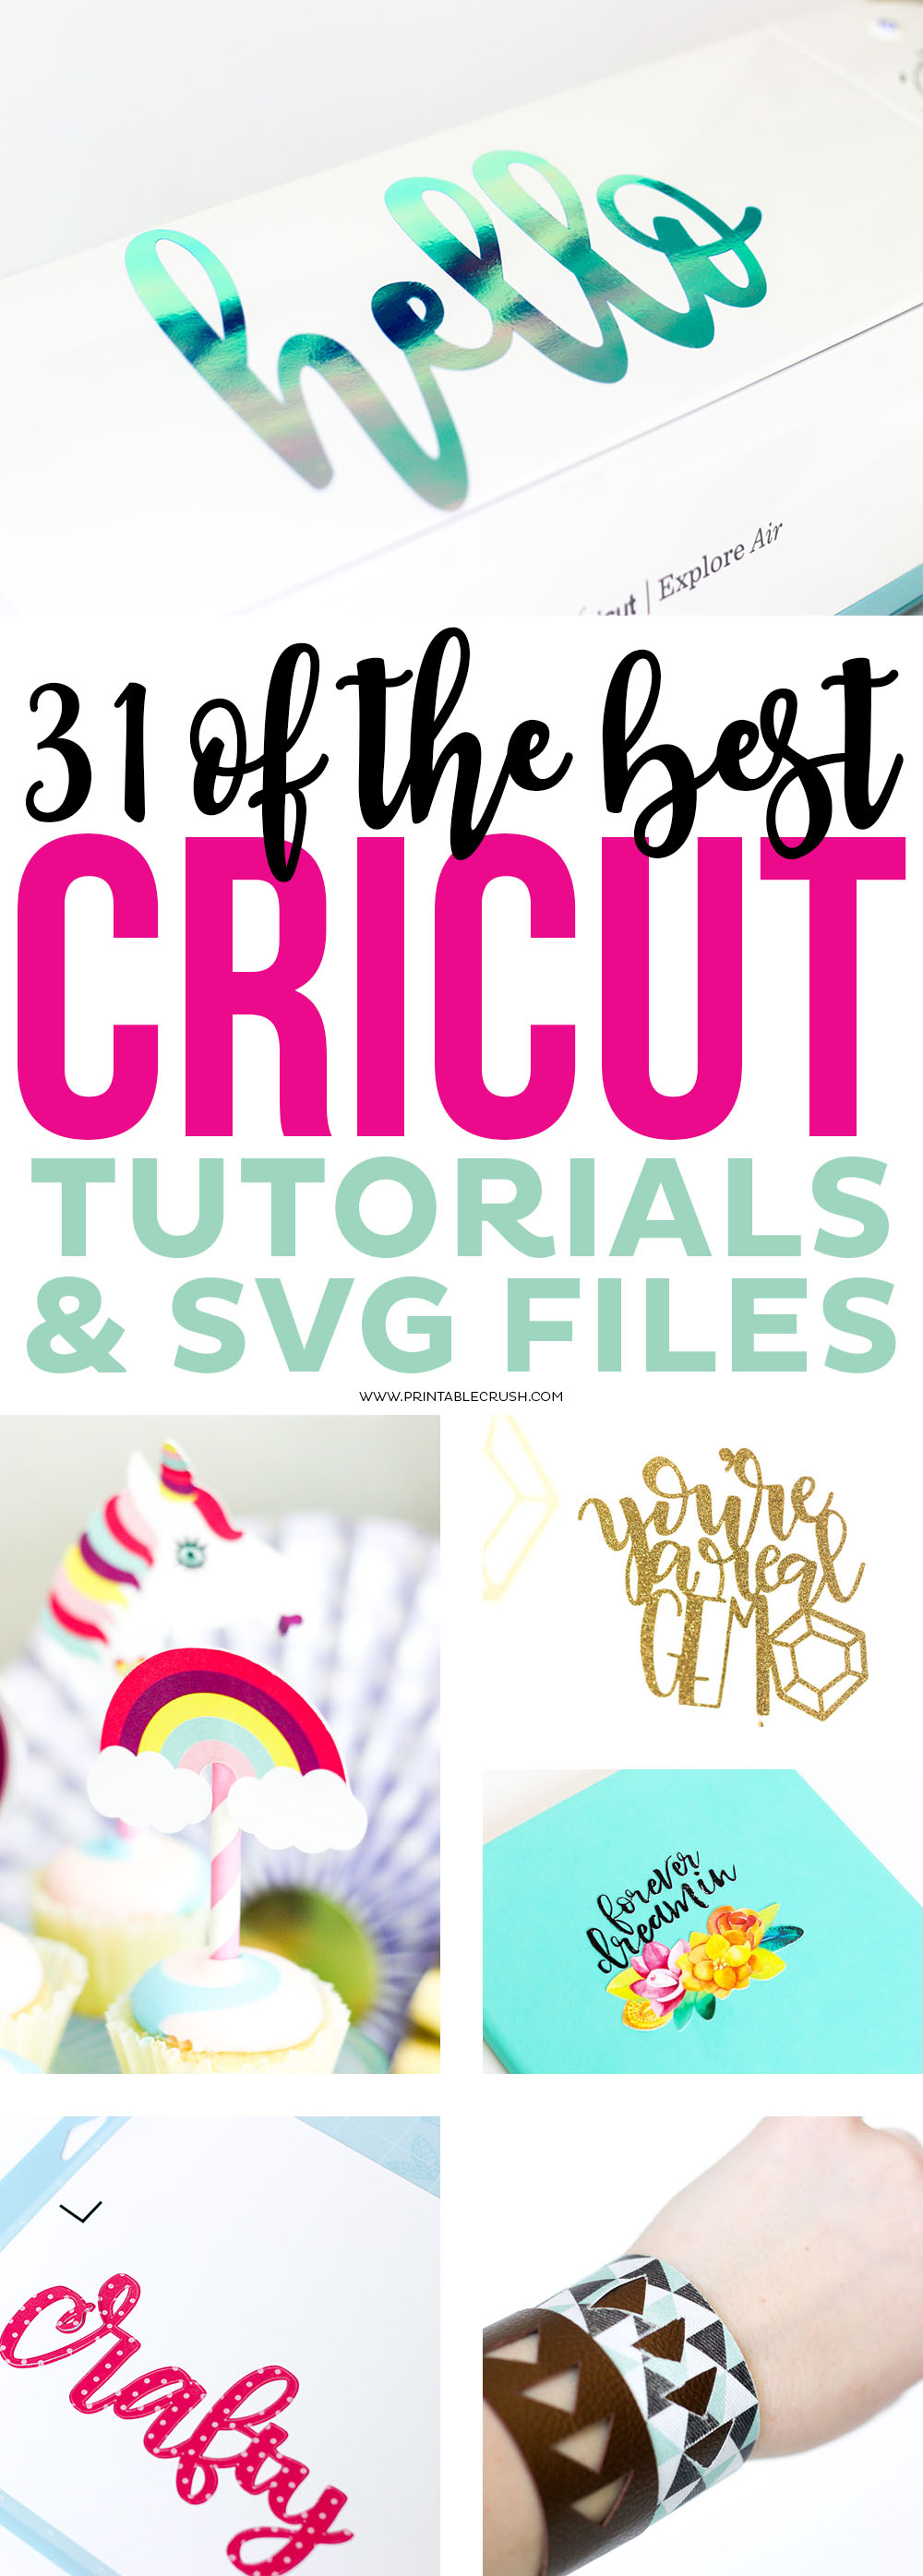 Download 31 of the BEST Cricut Tutorials and SVG Files - Printable Crush